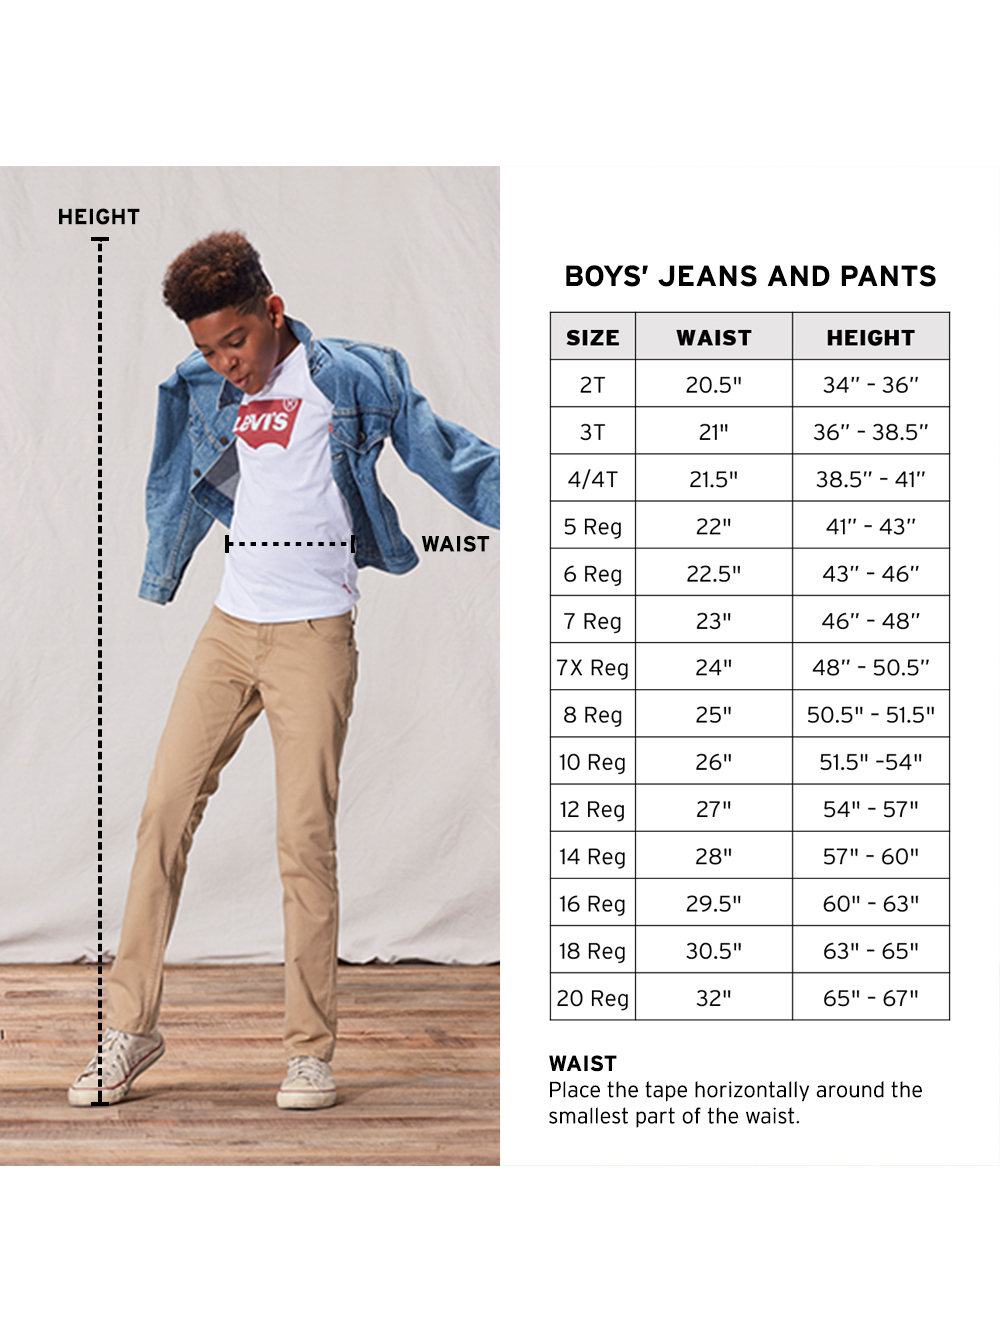 Levi's Boys' 511 Slim Fit Performance Jeans, Sizes 4-20 - image 4 of 12